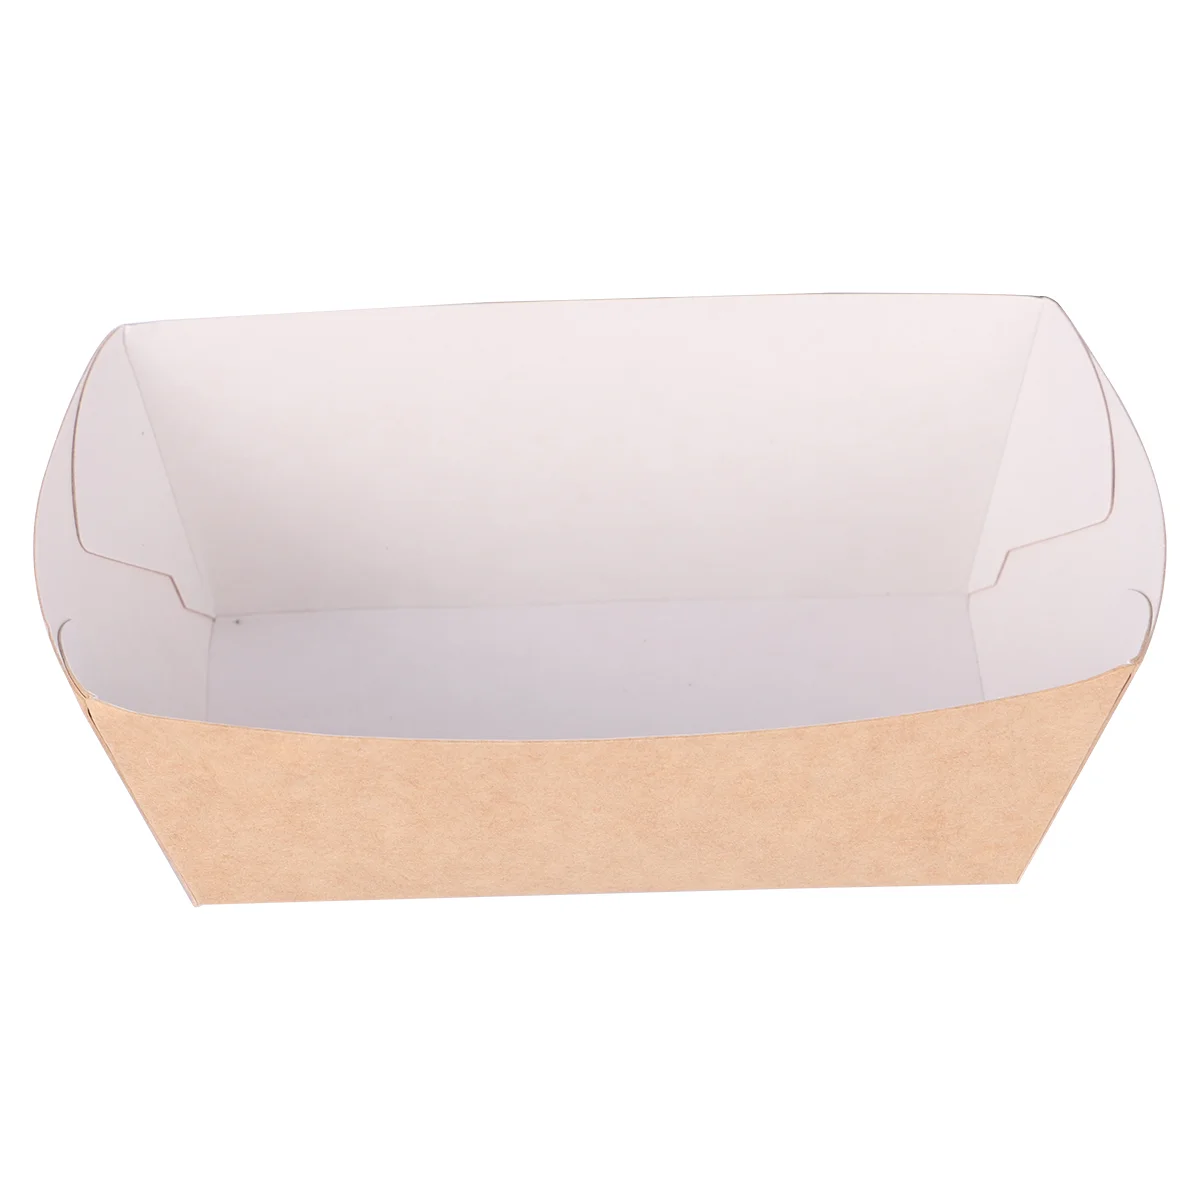 

100 Kraft Paper Paper Serving Tray Holder Plate Take Home Bowl for Party Nachos Tacos Camping